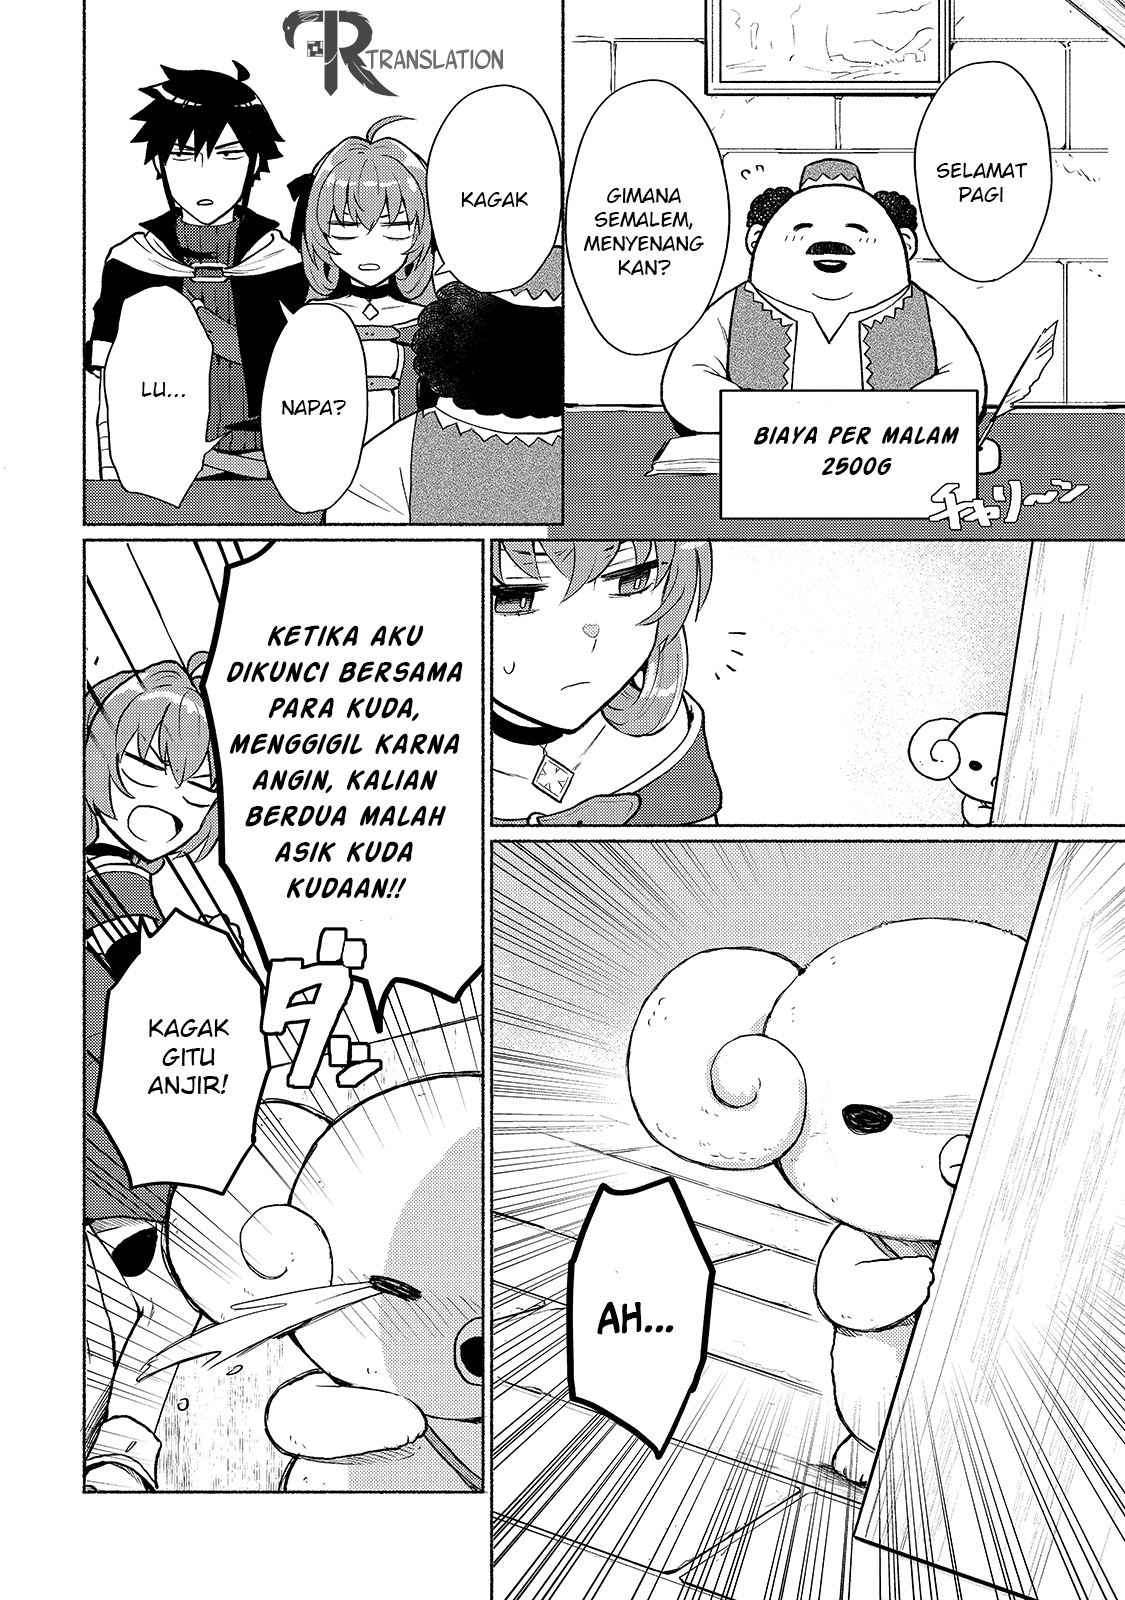 Dilarang COPAS - situs resmi www.mangacanblog.com - Komik when i was reincarnated in another world i was a heroine and he was a hero 005 - chapter 5 6 Indonesia when i was reincarnated in another world i was a heroine and he was a hero 005 - chapter 5 Terbaru 6|Baca Manga Komik Indonesia|Mangacan